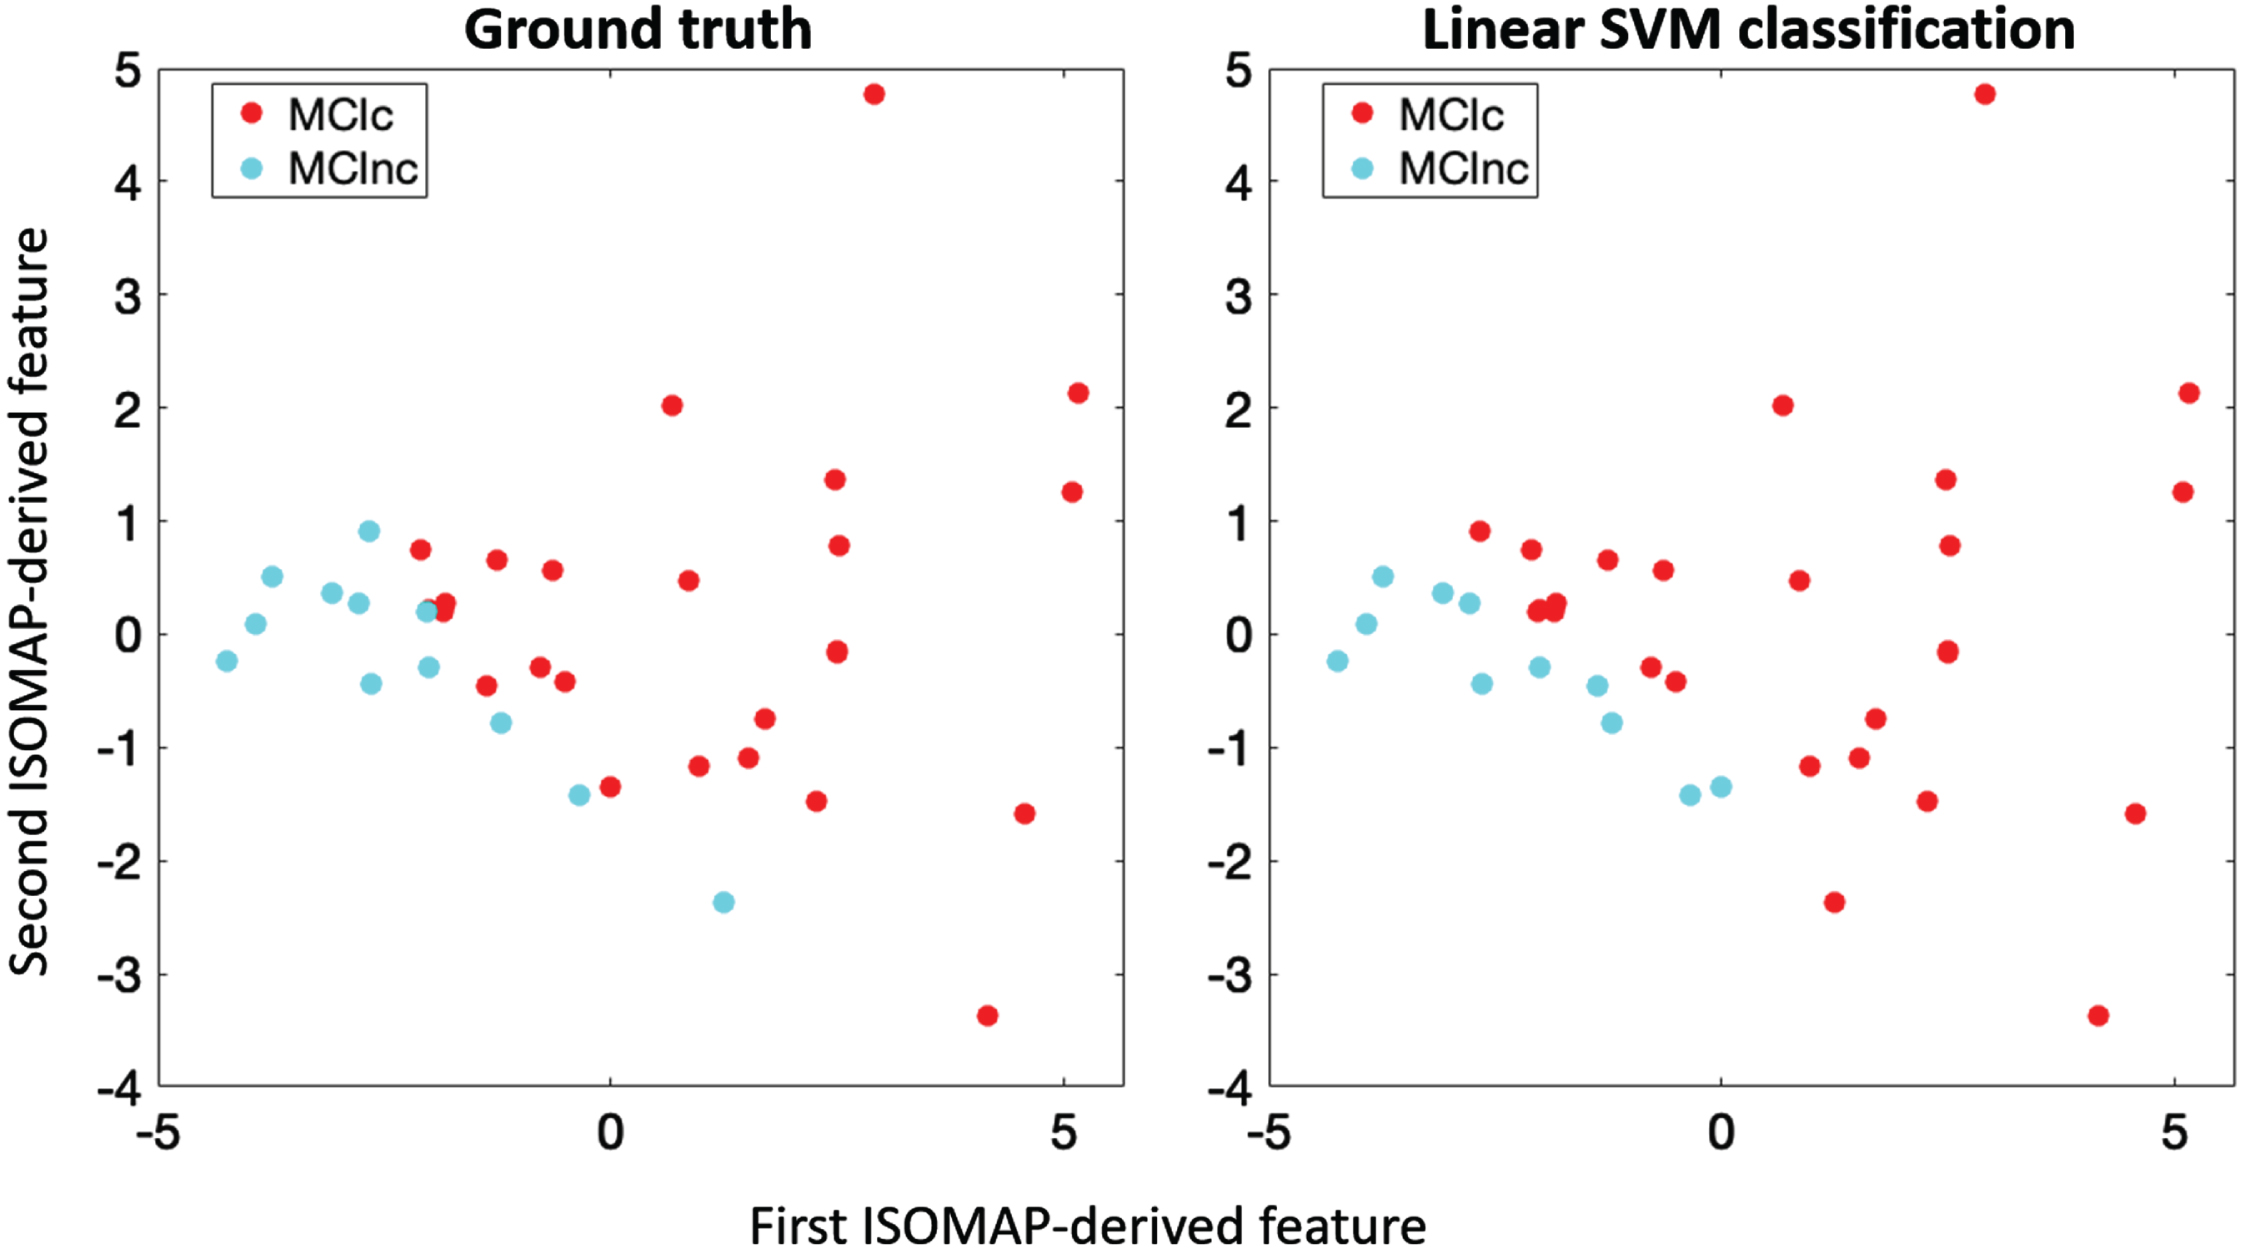 Scatterplot representation of converter (MCIc, red) and non-converter MCI patients (MCInc, light blue) in the 2-dimensional reduced space retrieved by applying ISOMAP on the sulcal features. Left: Ground truth labelling of MCI; right: Linear support vector machine classification labelling: 5 out of 37 MCI patients were misclassified.